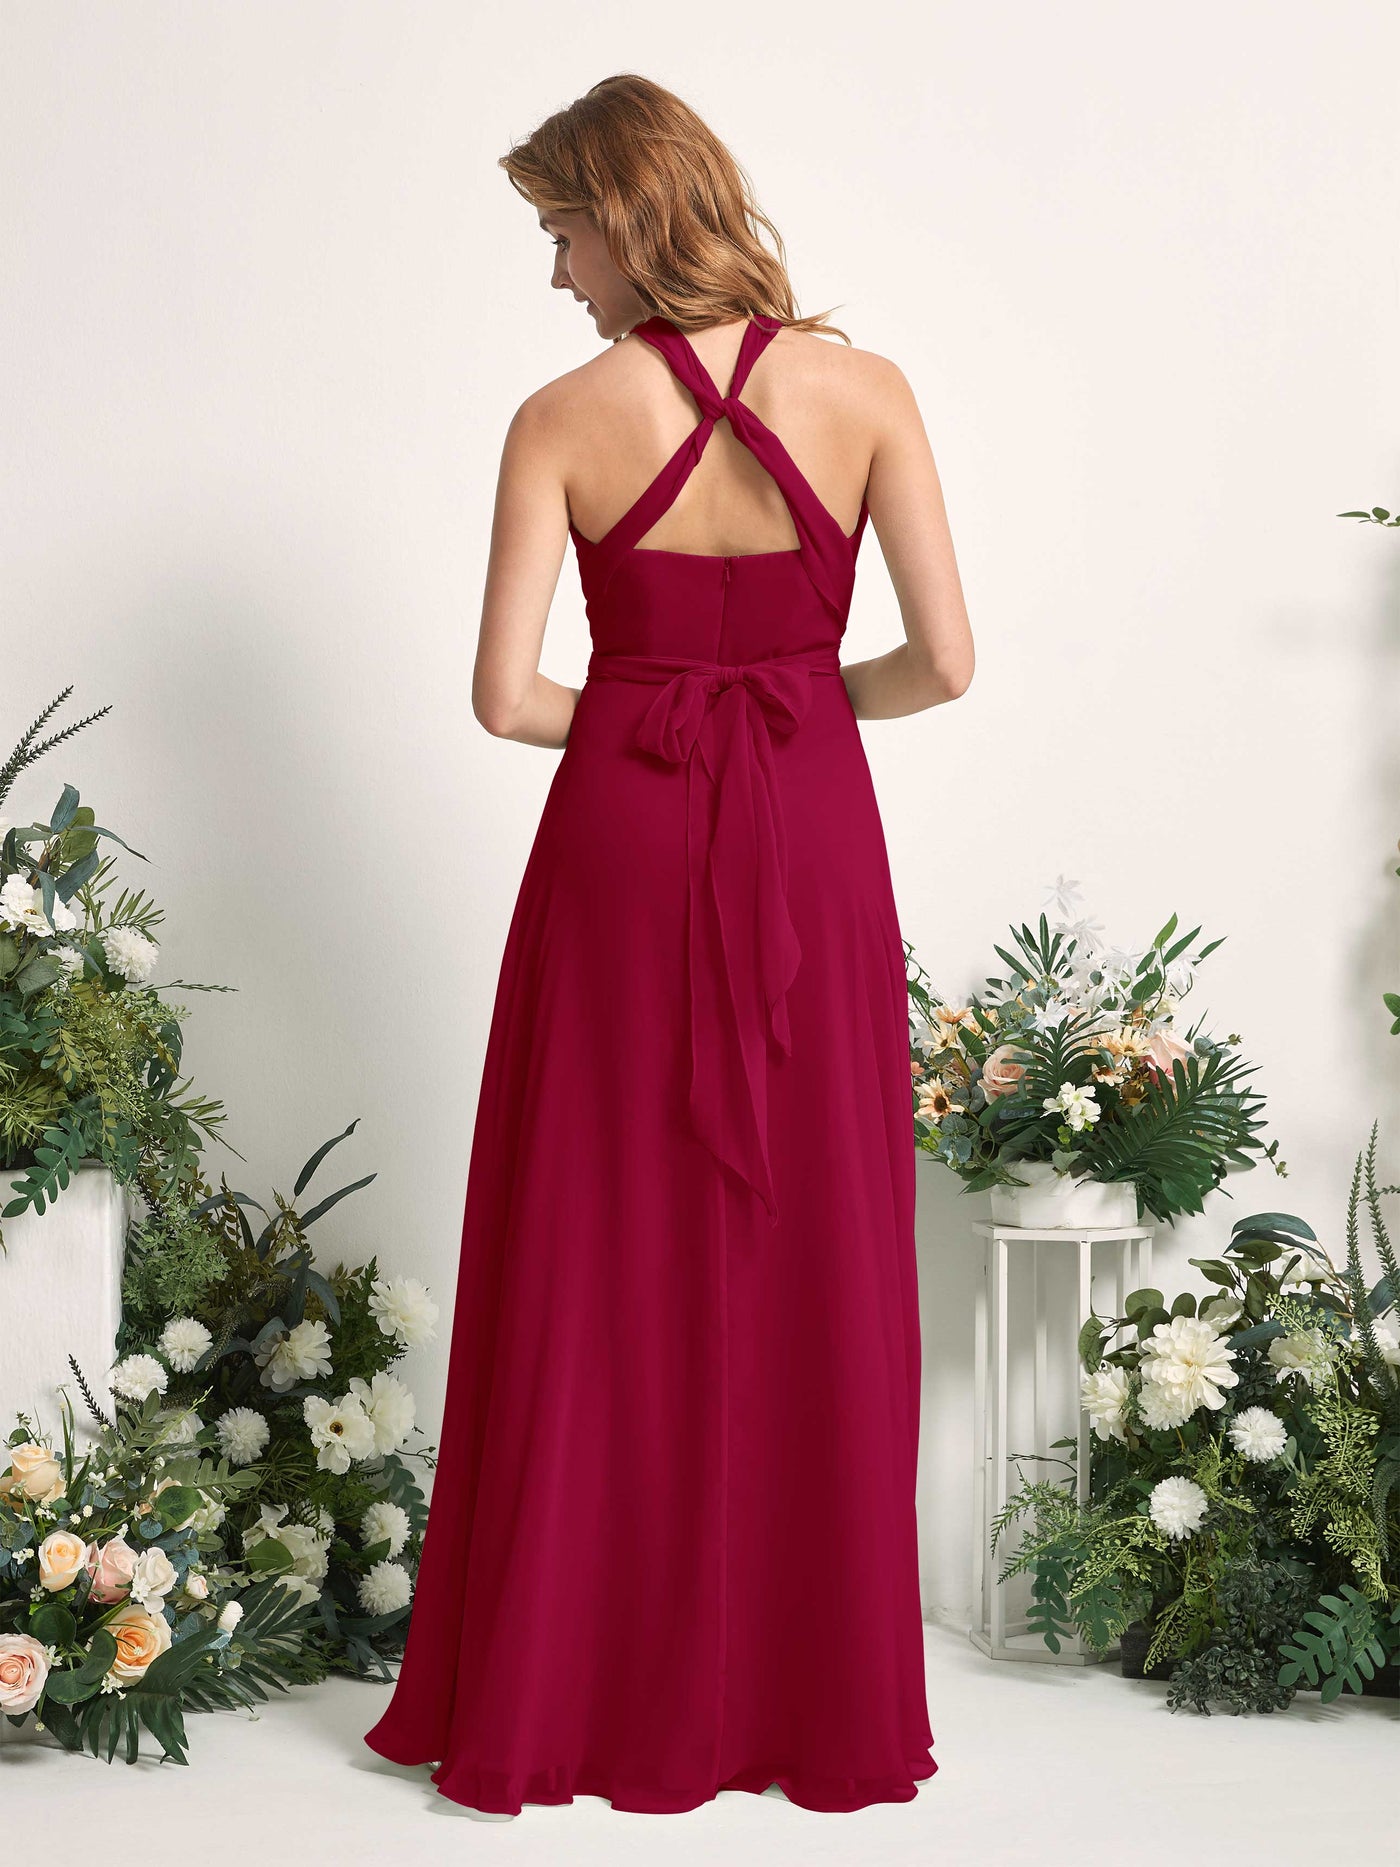 Jester Red Bridesmaid Dresses Bridesmaid Dress A-line Chiffon Halter Full Length Short Sleeves Wedding Party Dress (81226341)#color_jester-red